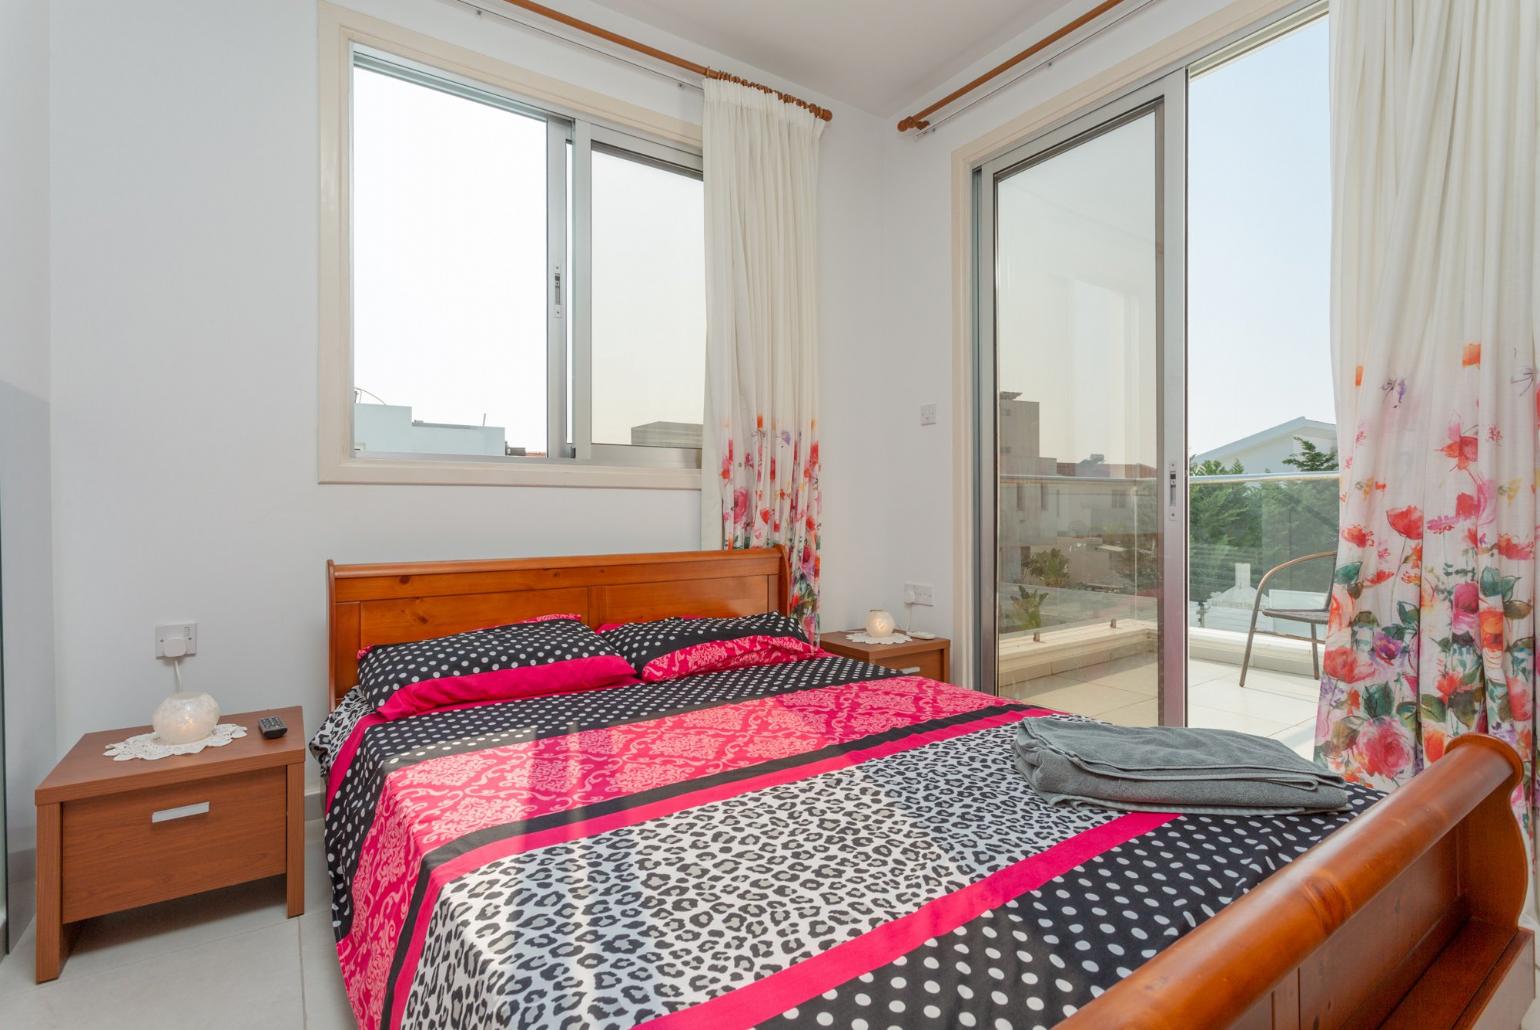 Double bedroom with A/C, satellite TV, and balcony access